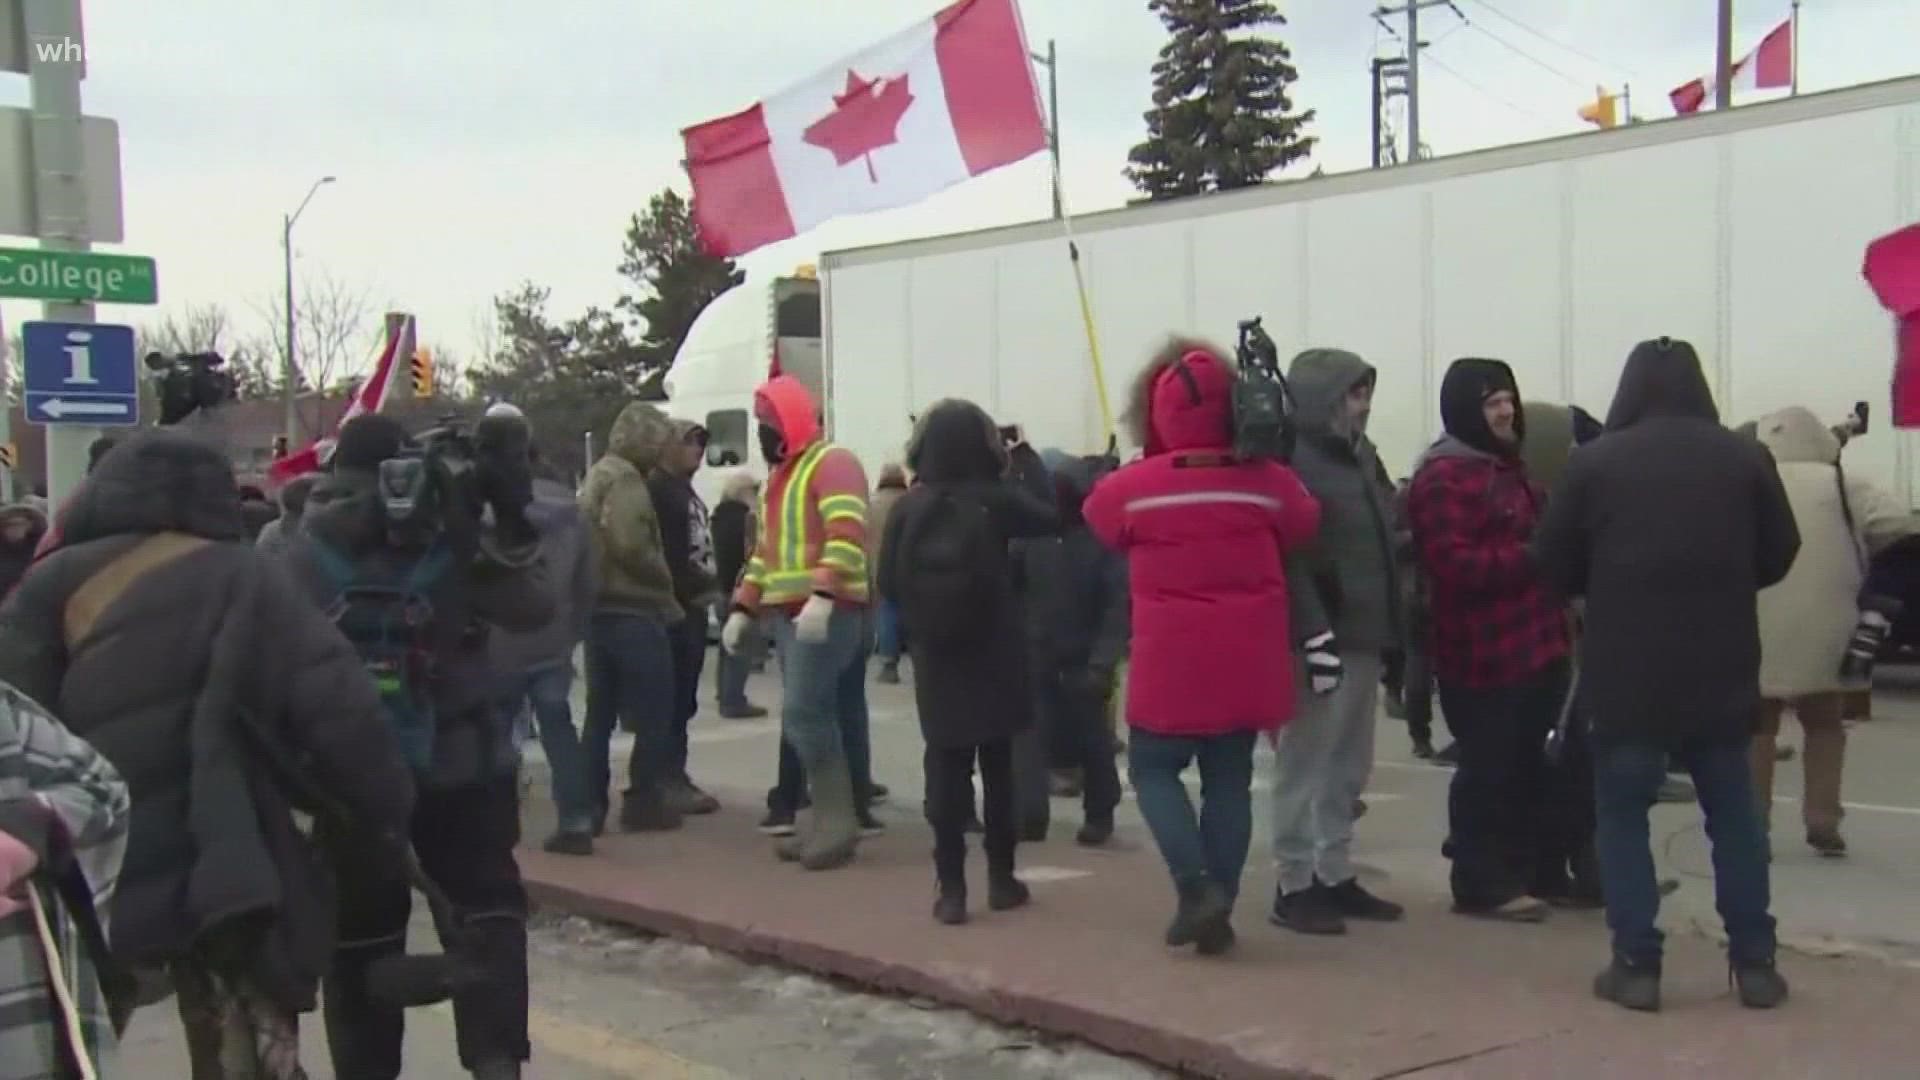 After a week of protests and demonstrations against recent COVID-19 restrictions, police removed protesters from the Ambassador Bridge on Sunday.